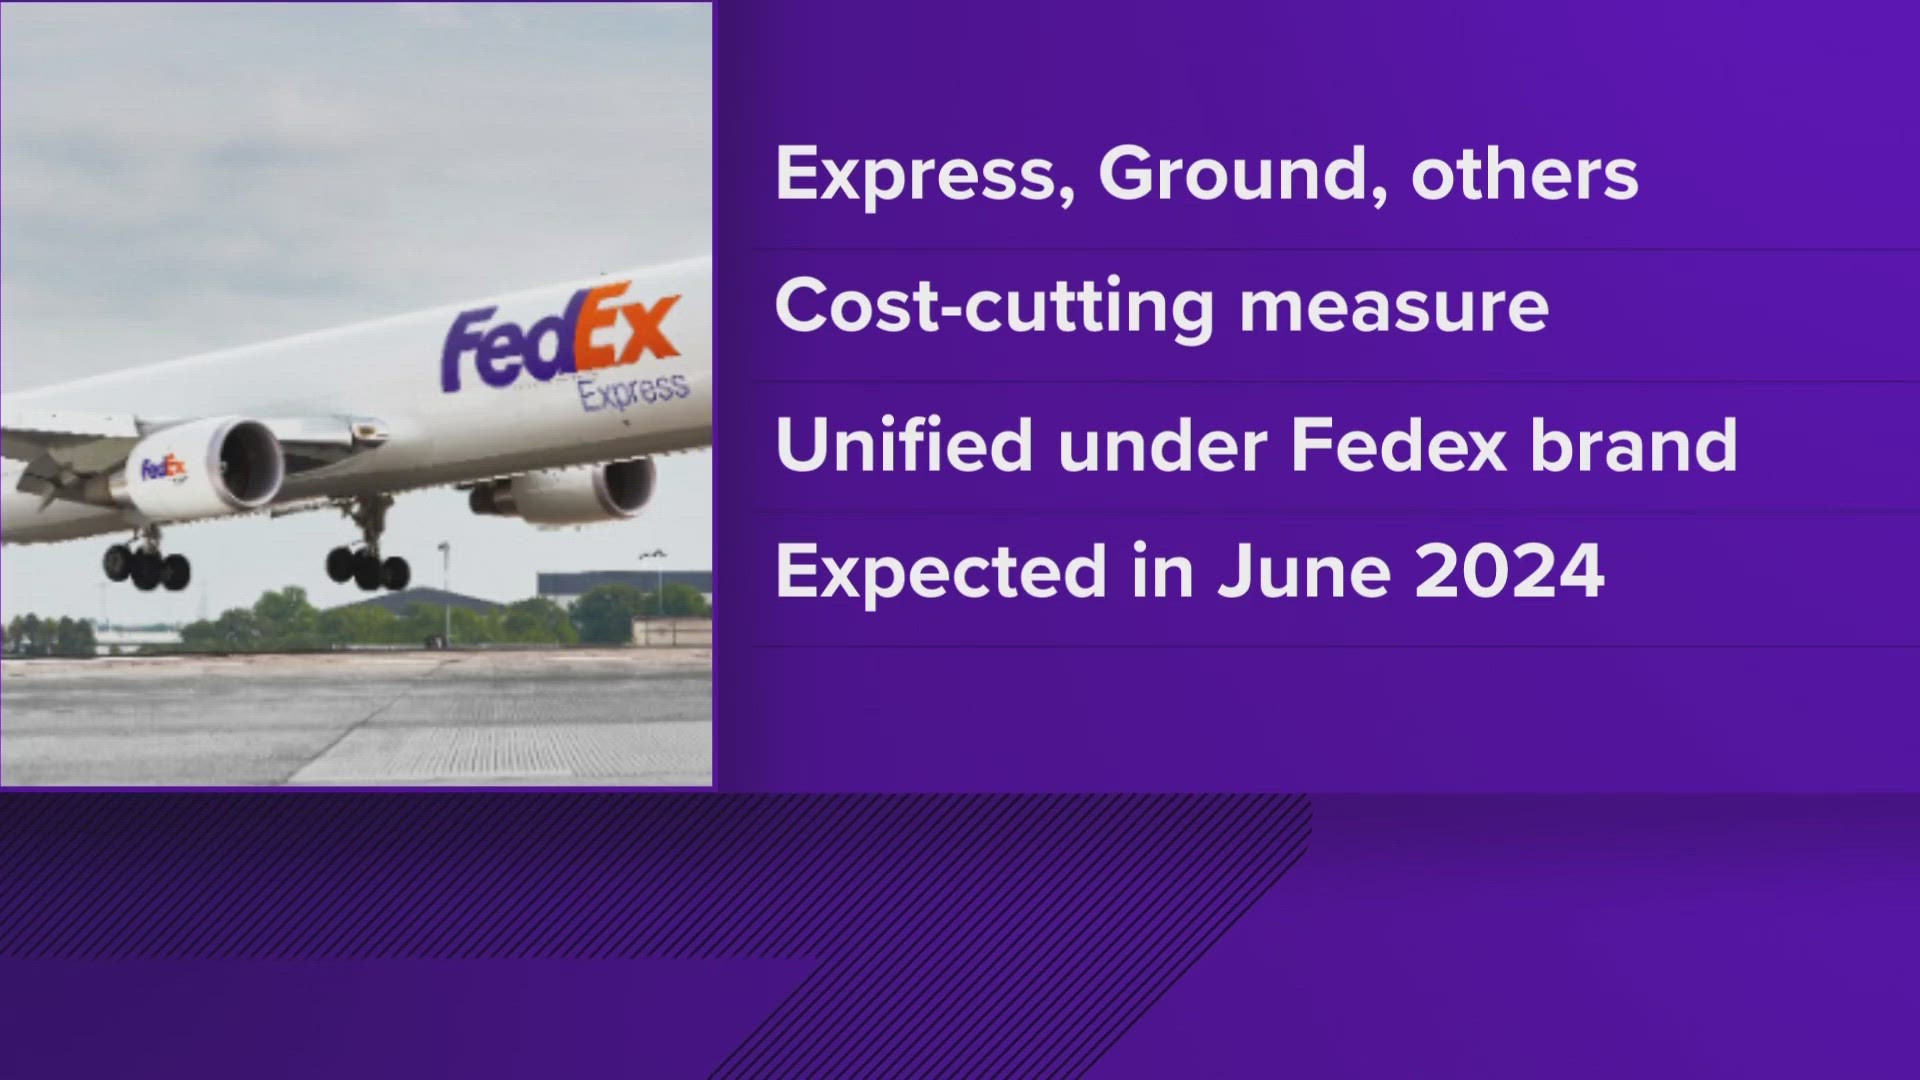 The company said FedEx Express, FedEx Ground, FedEx Services and other FedEx operating companies will be rolled into a single entity by June 2024.